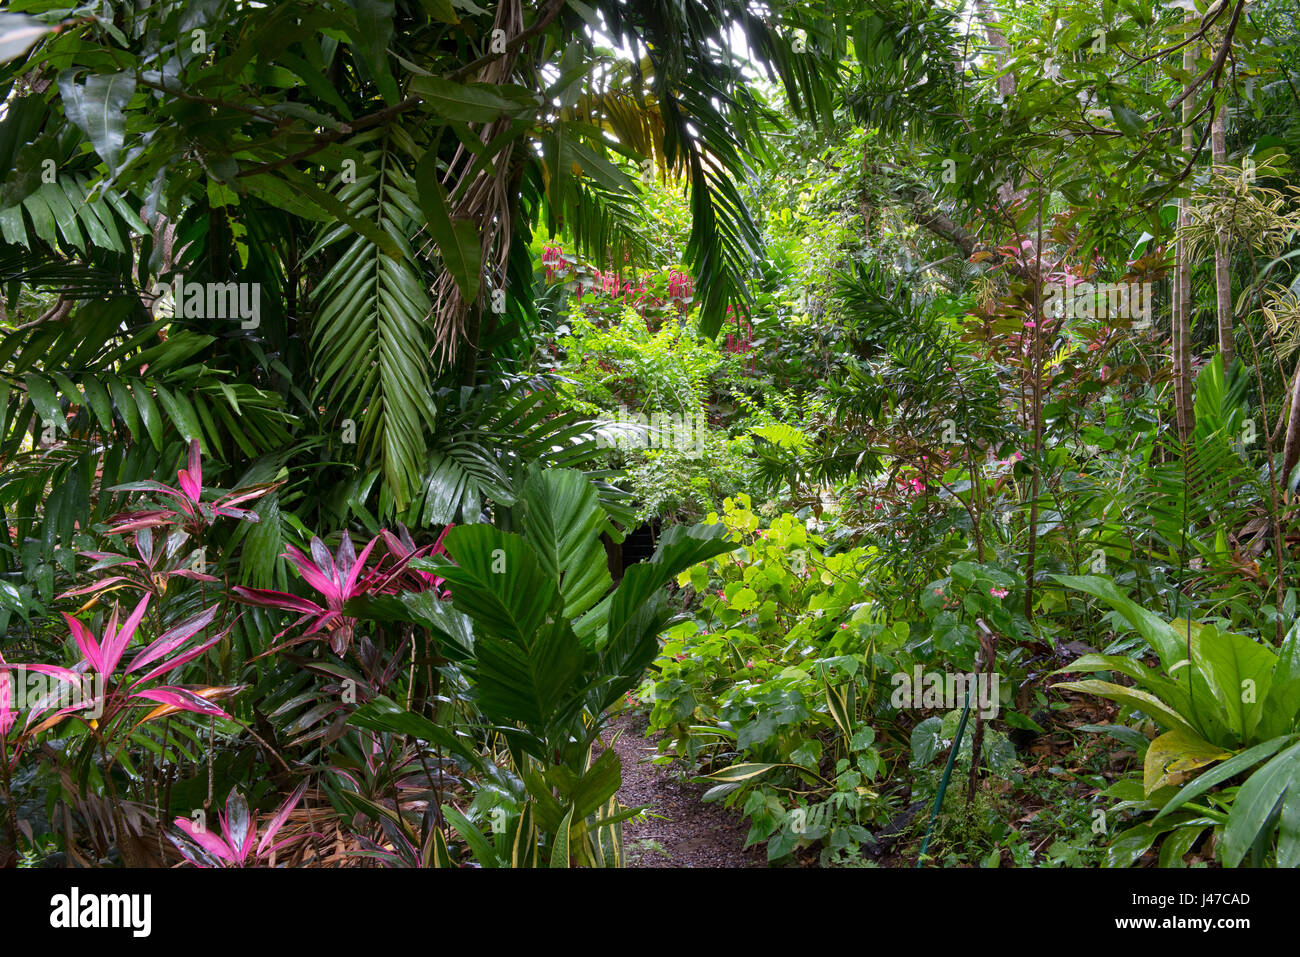 Purple leaved Cordyline Fruiticosa, palm trees and other tropical plants in the Gemrose Eden Garden, St. David's, Grenada Stock Photo